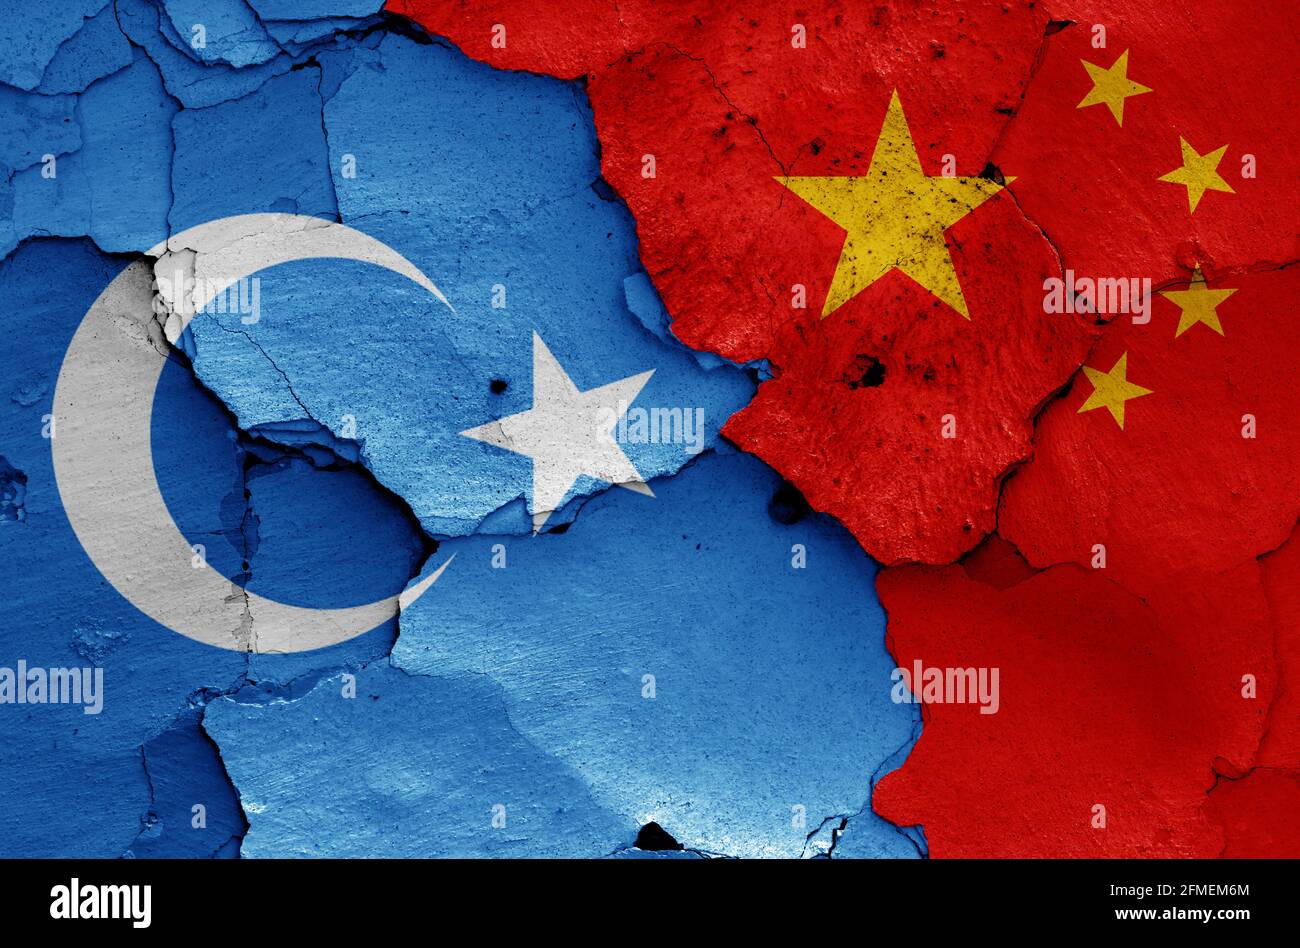 flags of East Turkestan and China painted on cracked wall Stock Photo